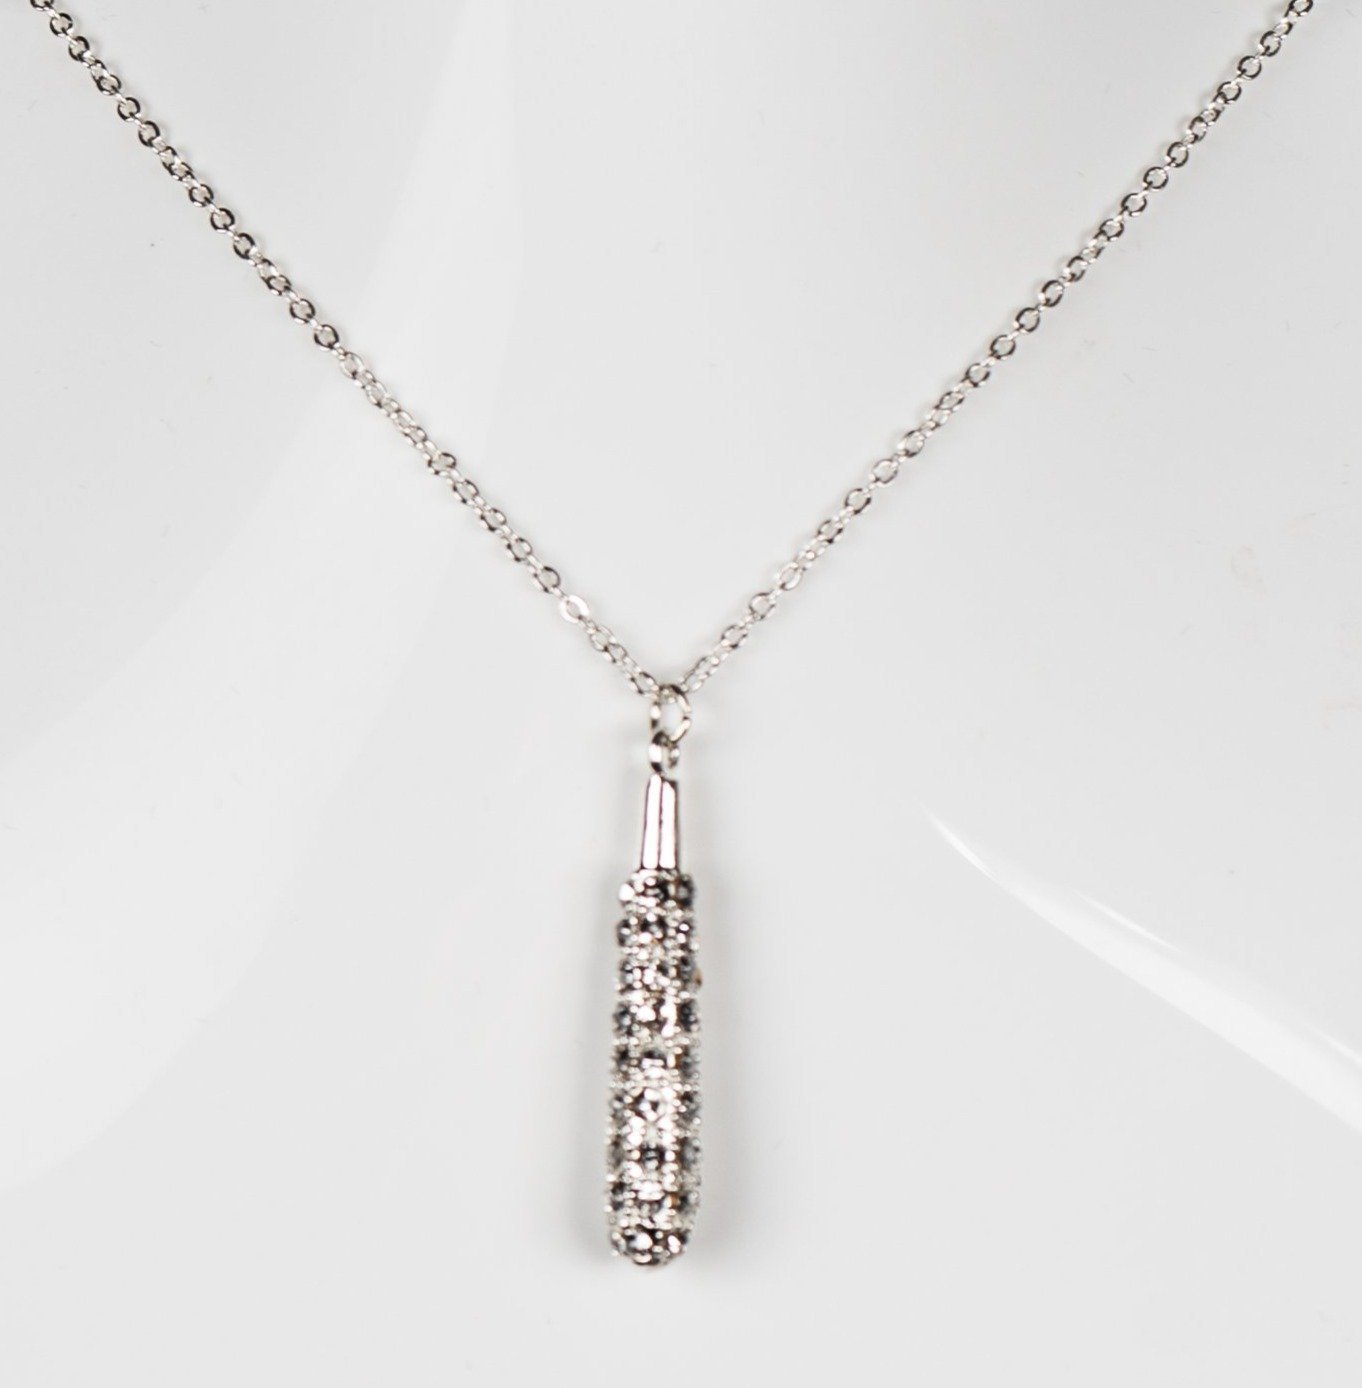 Induglence Necklace - A & M News and Gifts